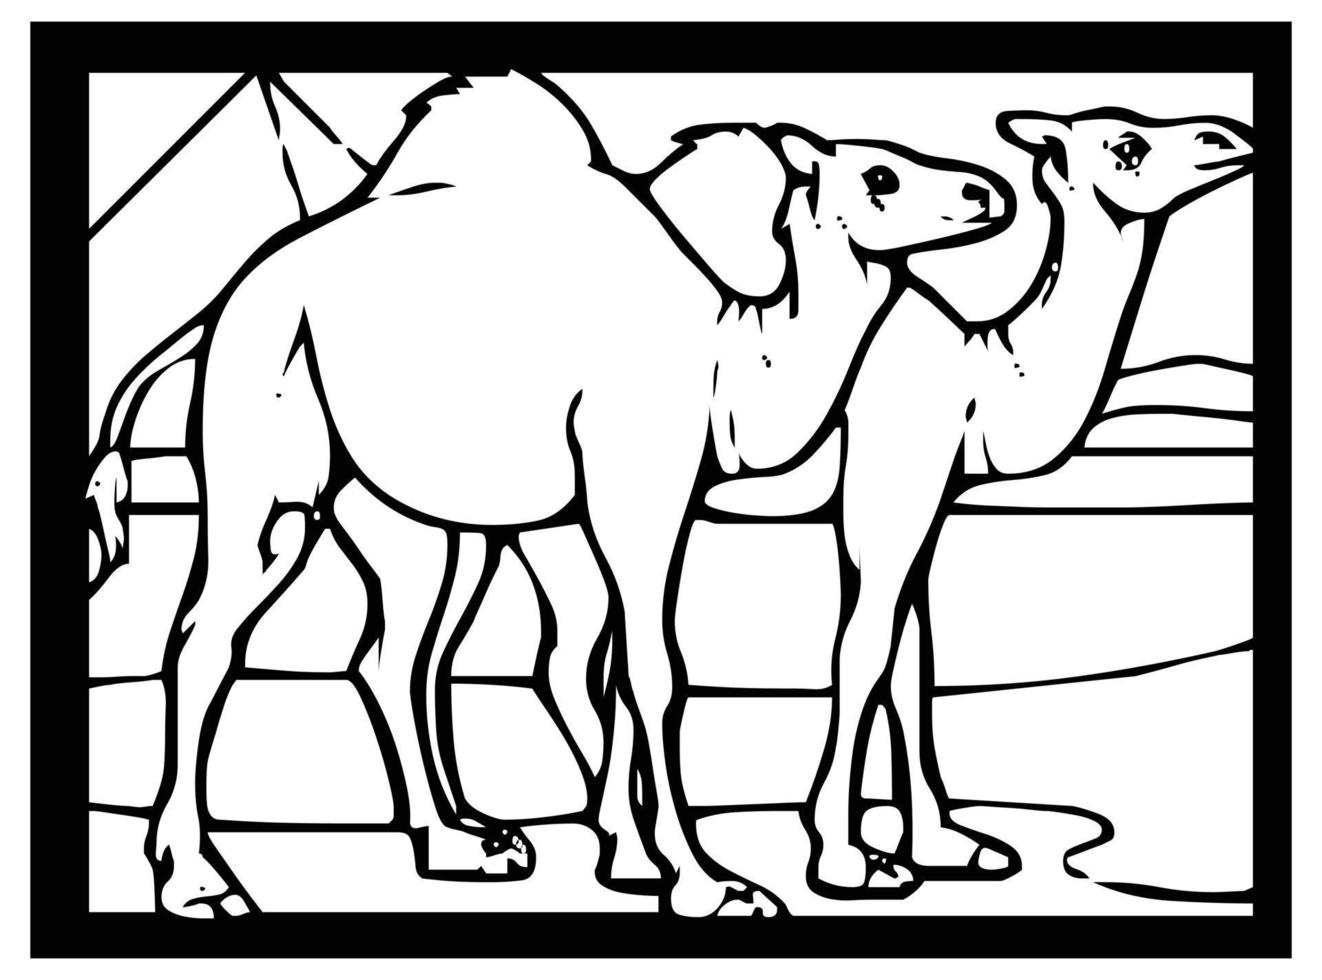 Camel sketch on black and white background inside frame for comic or coloring. vector